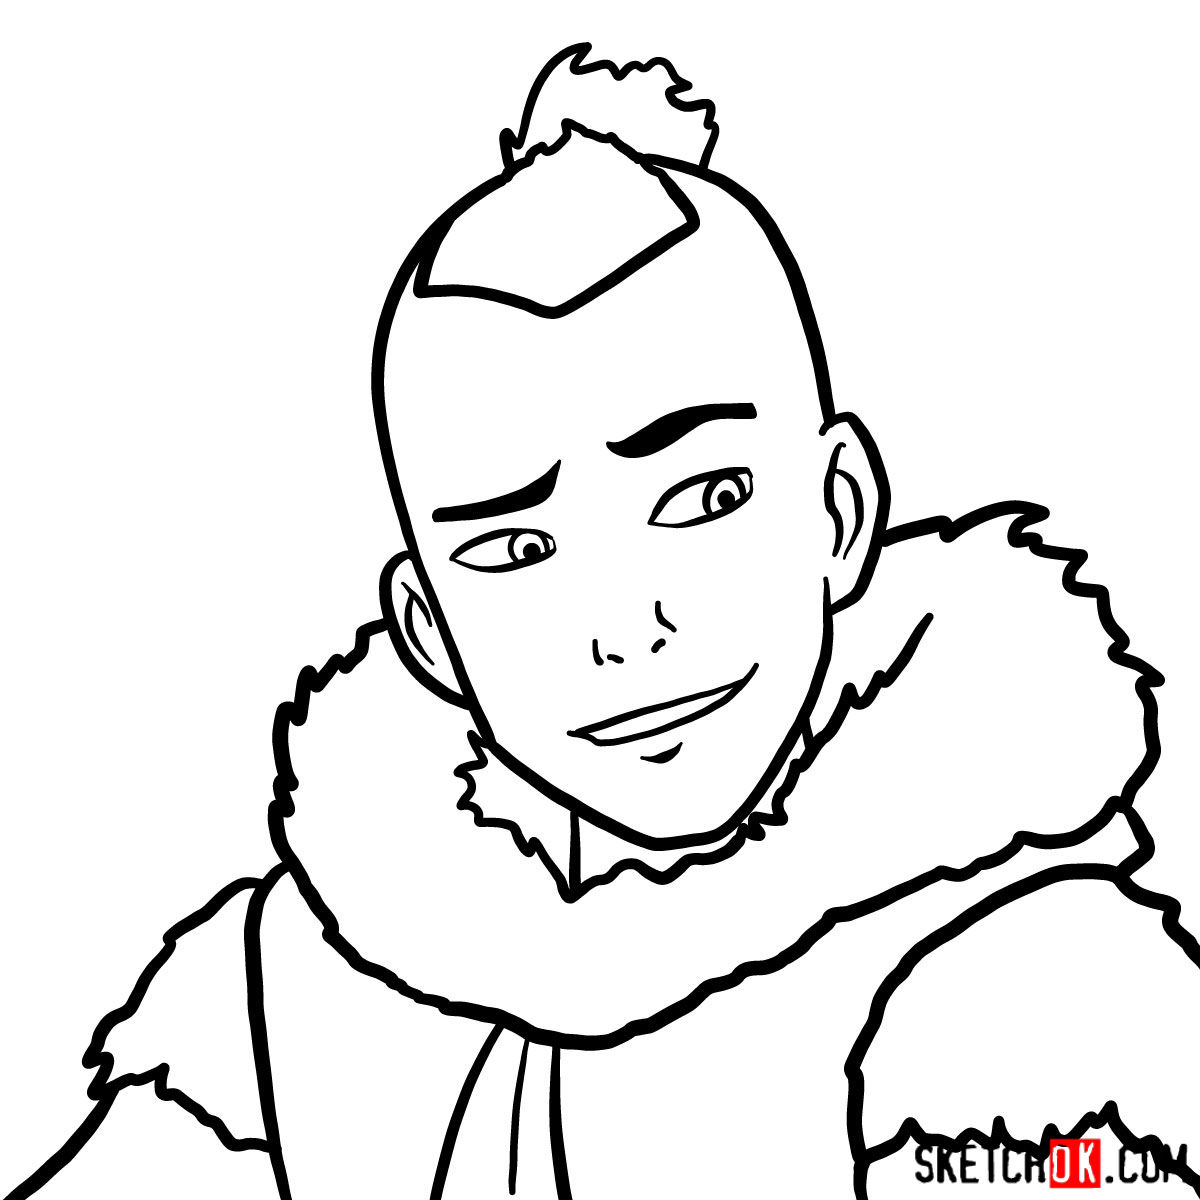 How to draw Sokka's face - step 07.